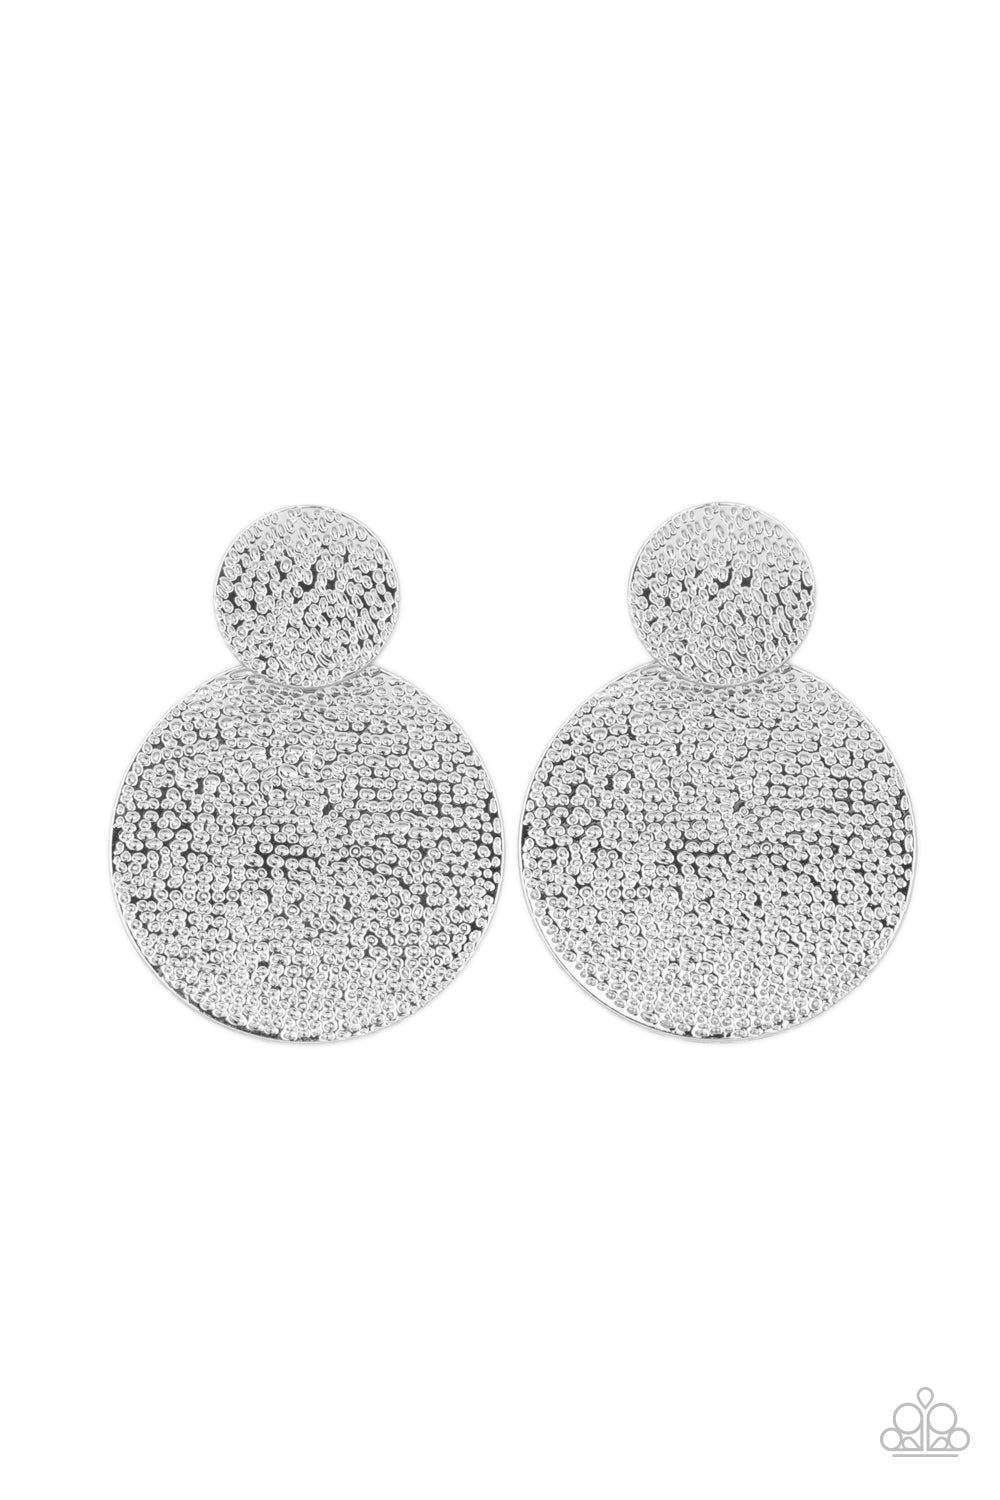 Paparazzi Refined Relic - Silver Earrings - A Finishing Touch Jewelry